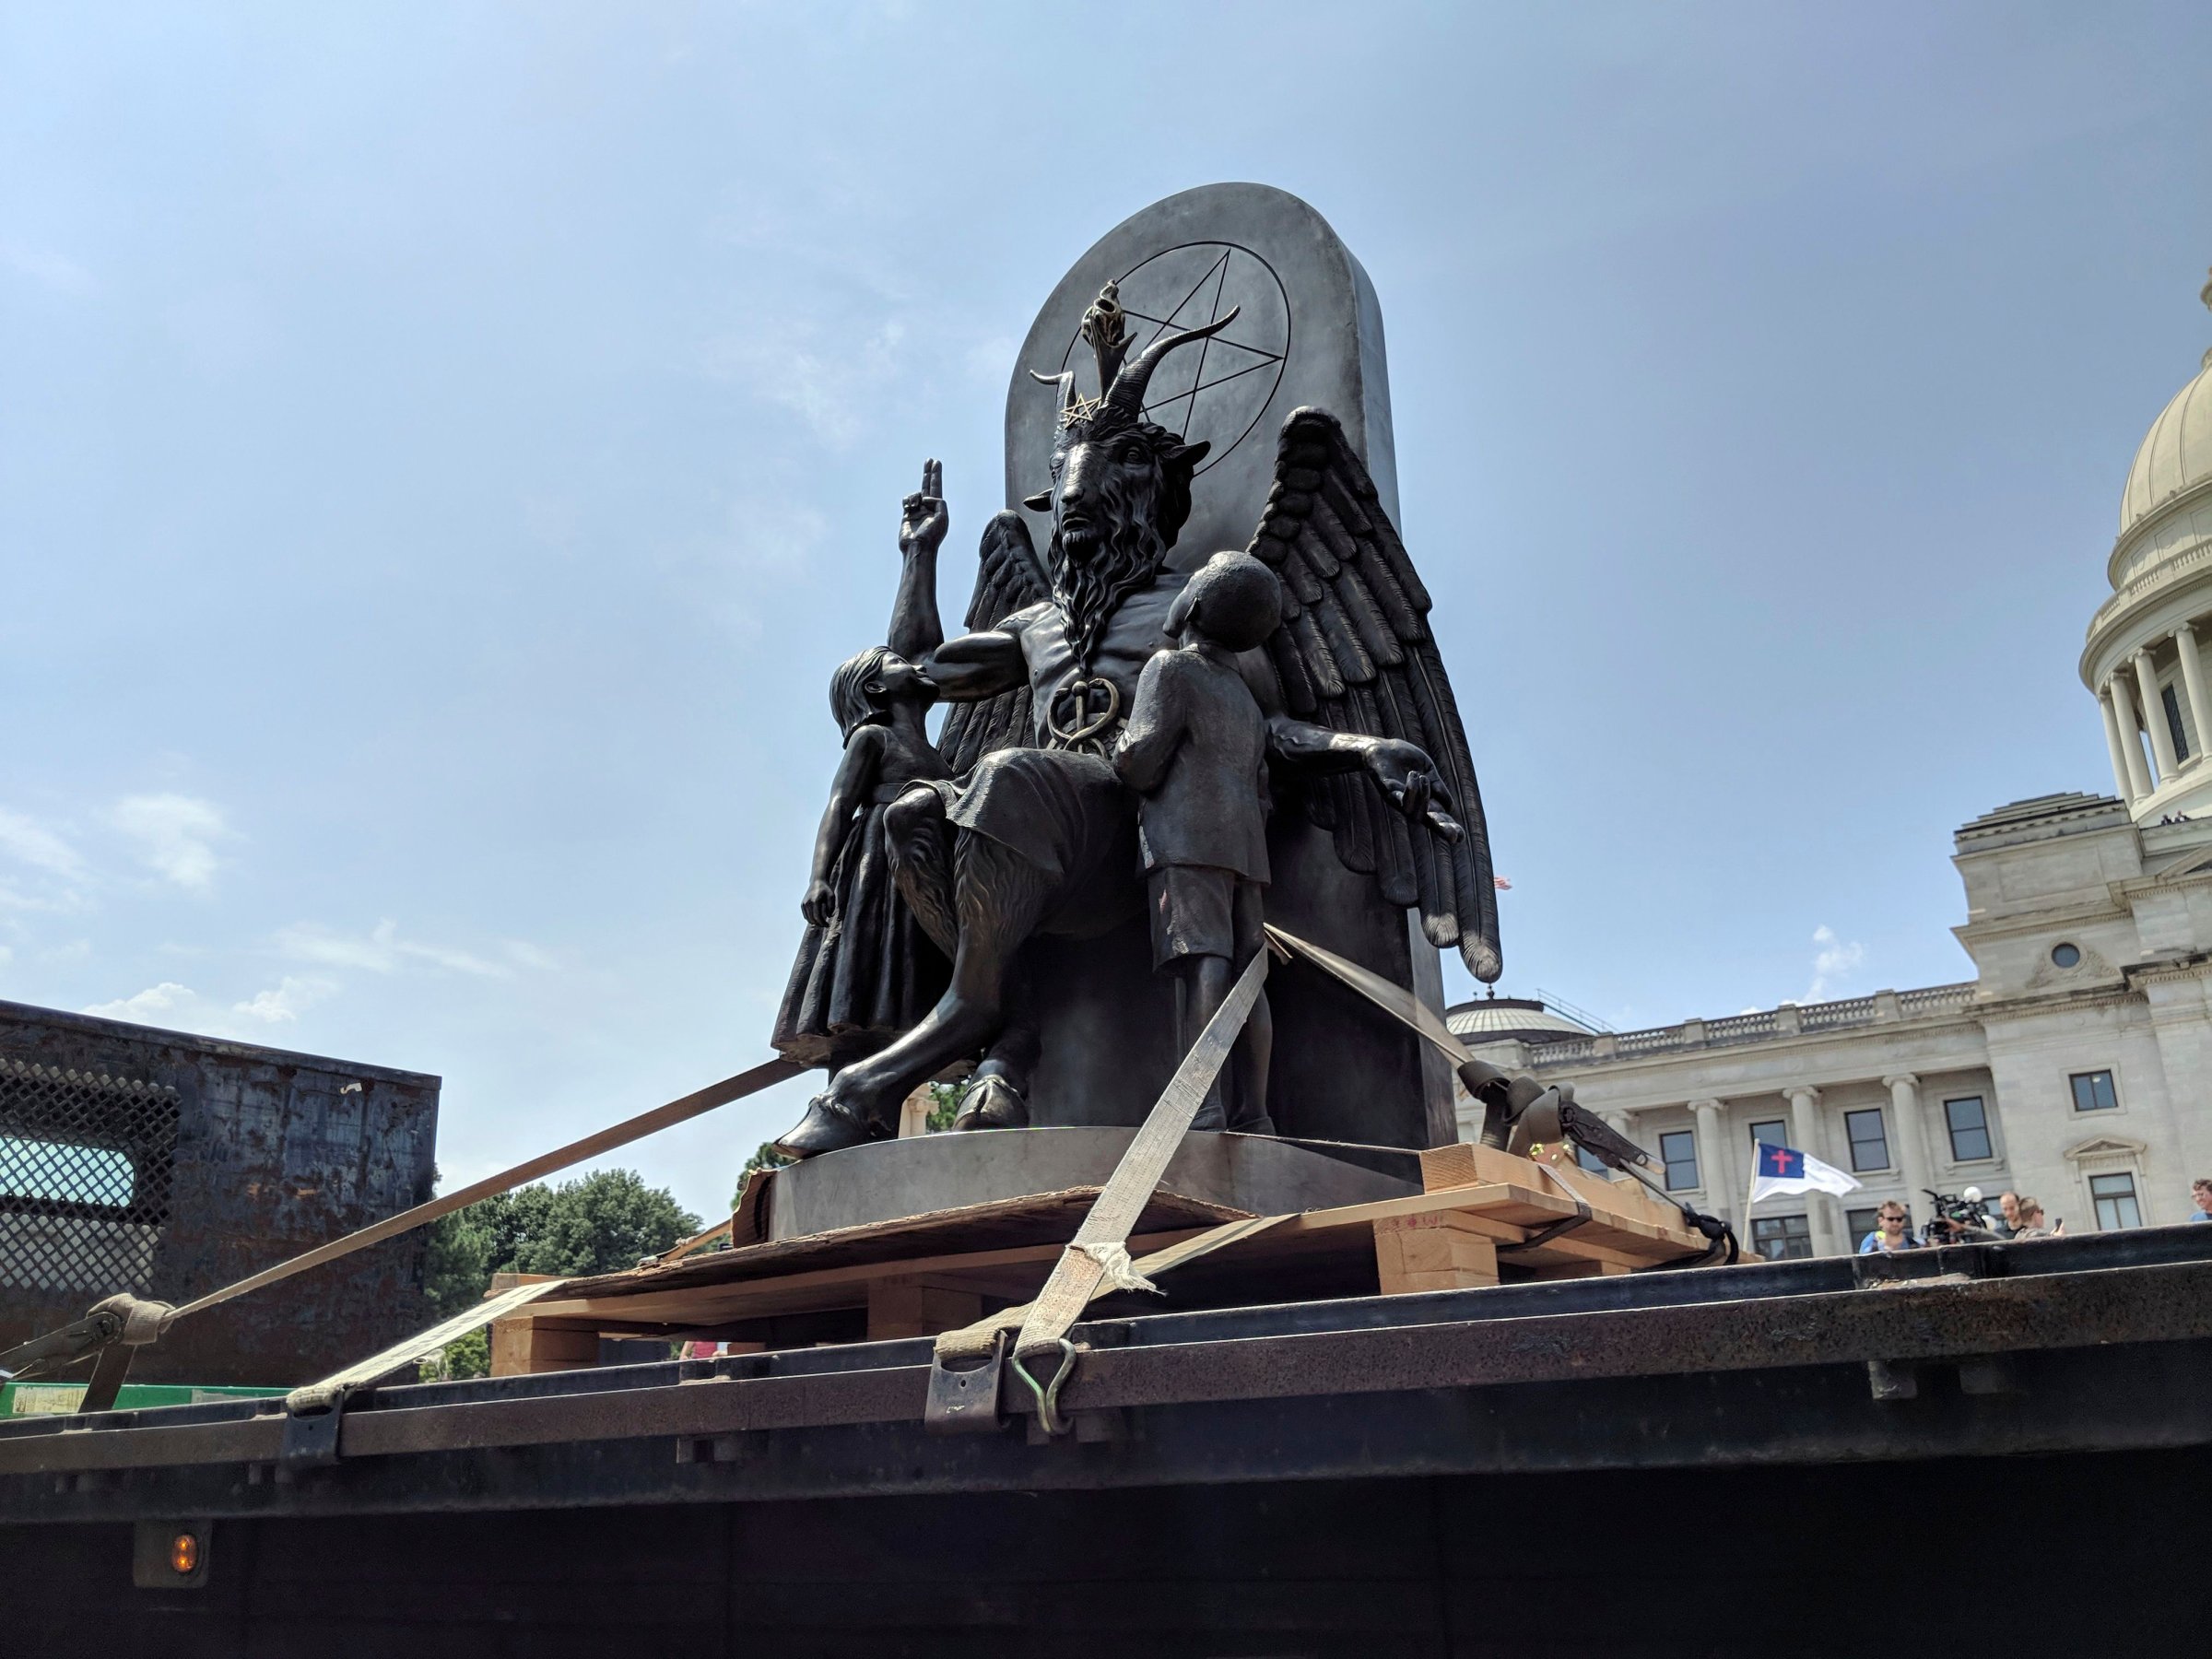 The statue of Baphomet, a winged-goat creature, in Little Rock